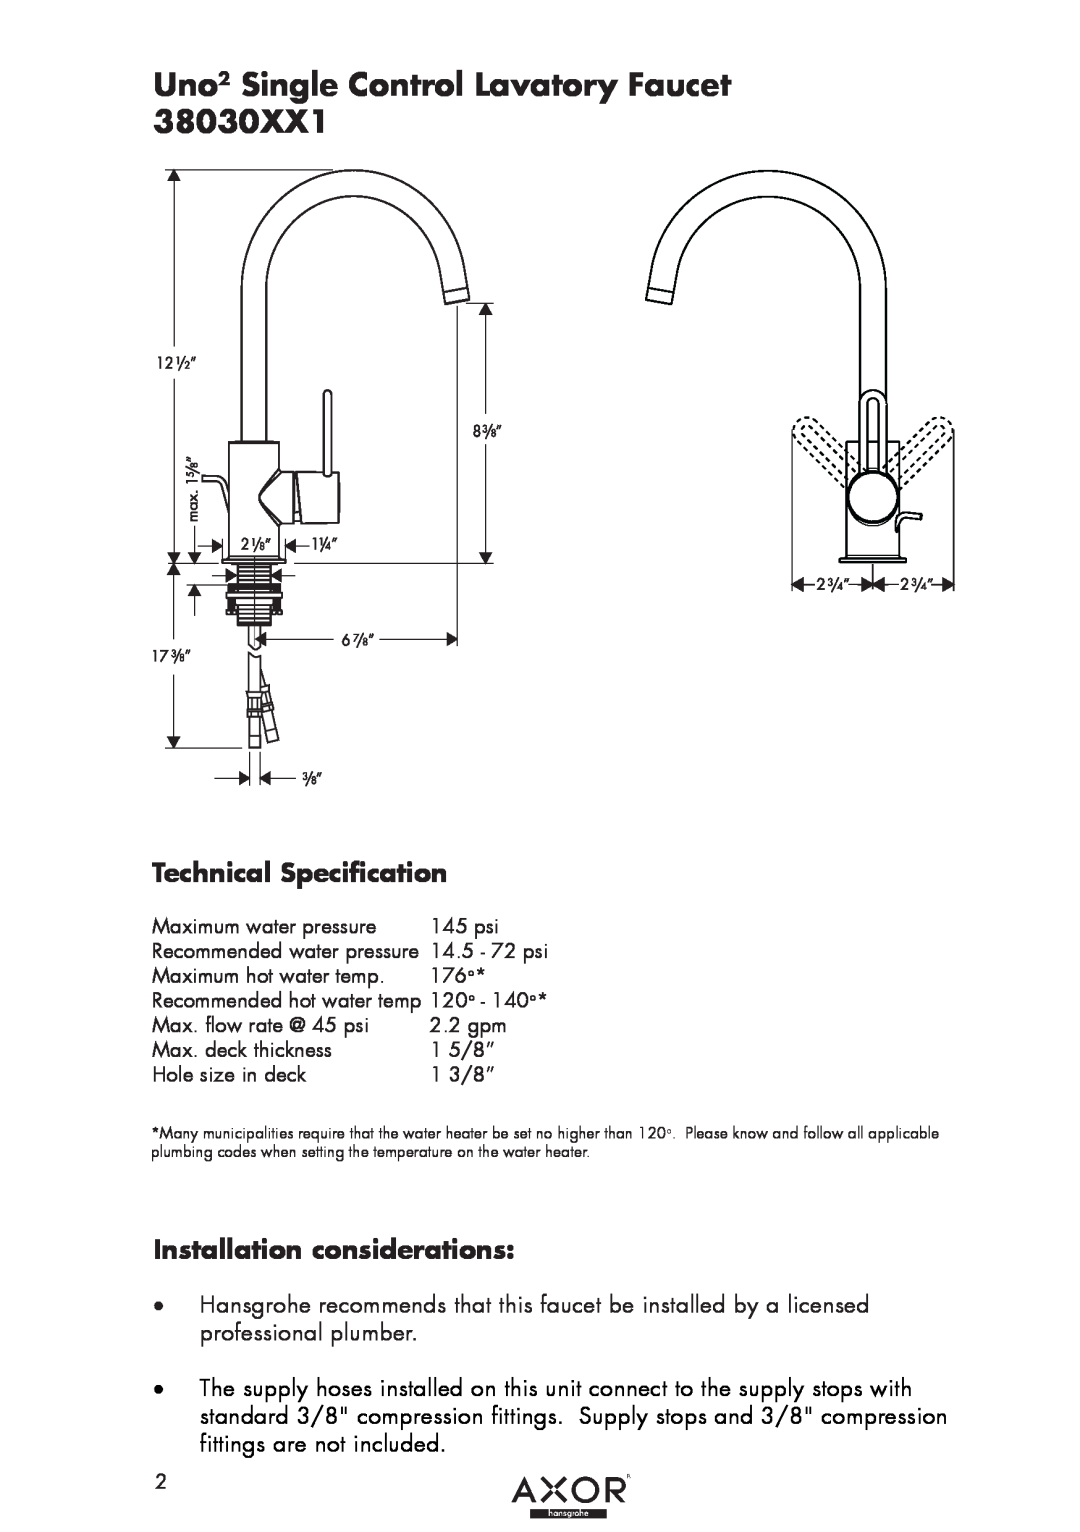 Axor 38030XX1 Technical Specification, Installation considerations, Uno2 Single Control Lavatory Faucet 